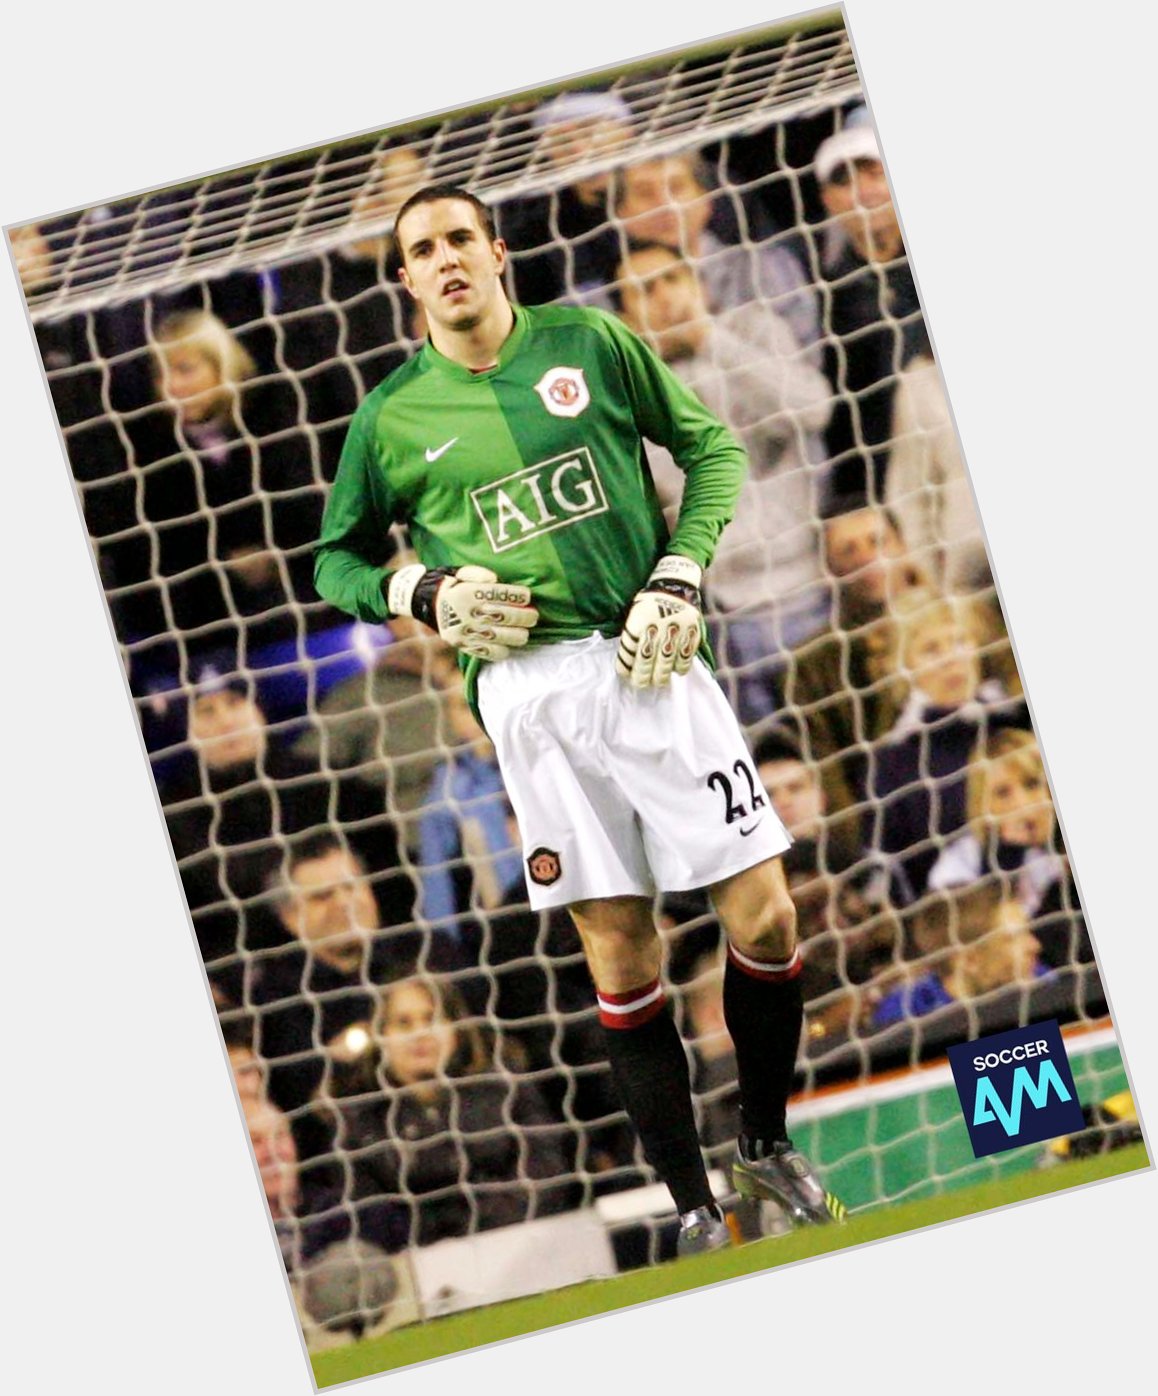 A defender playing in goal in the Premier League? He\s completed it mate.

Happy 39th Birthday to John O\Shea 